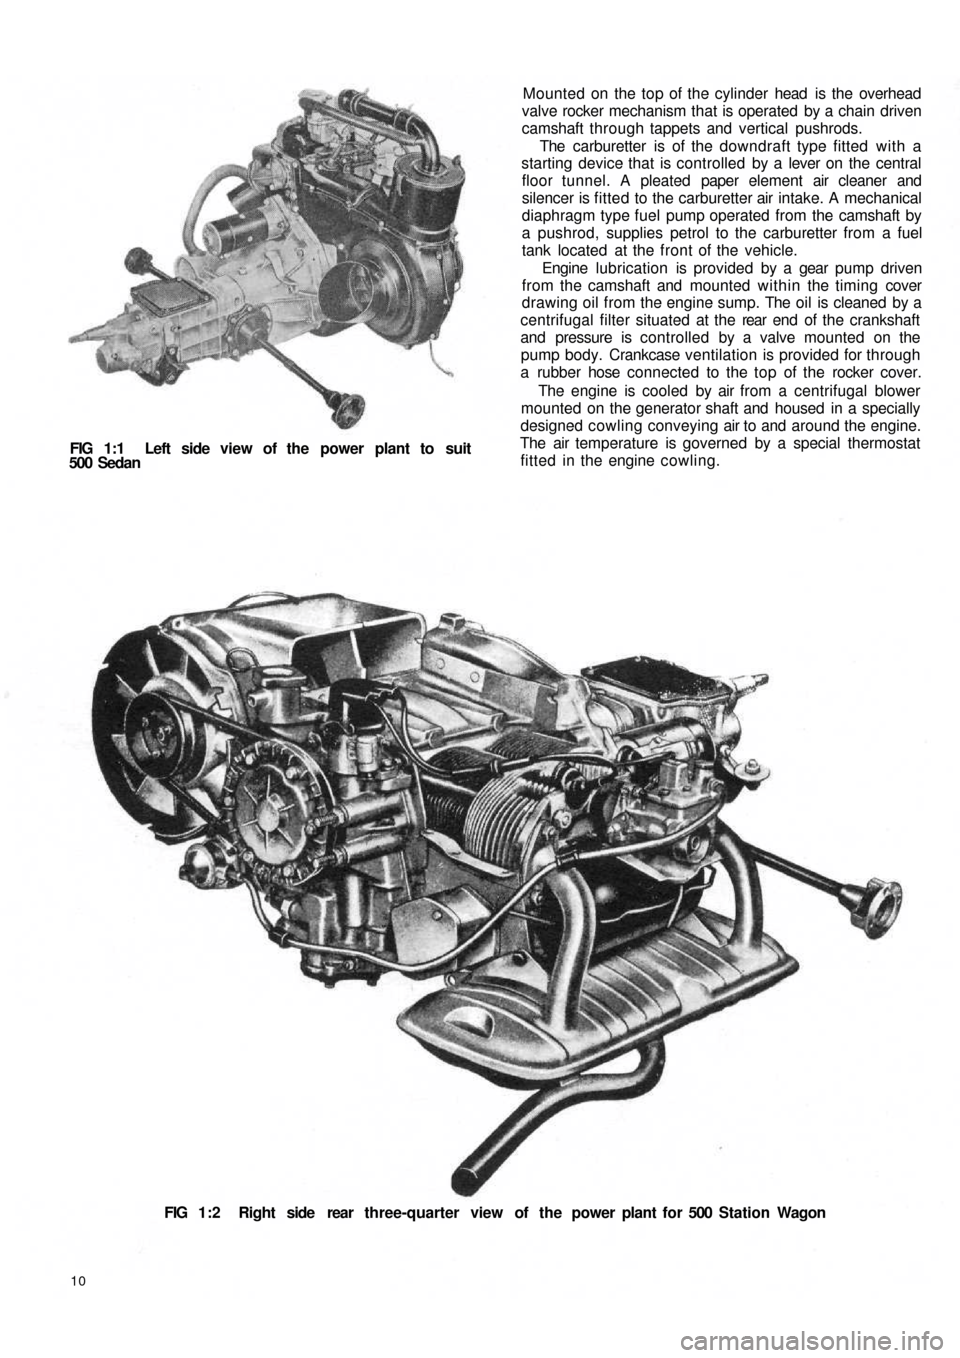 FIAT 500 1968 1.G Workshop Manual FIG 1:1  Left side view of the power plant to suit
500  Sedan
10
FIG 1:2  Right side  rear  three-quarter view of the power plant for 500 Station  Wagon Mounted on the top of the cylinder  head  is th